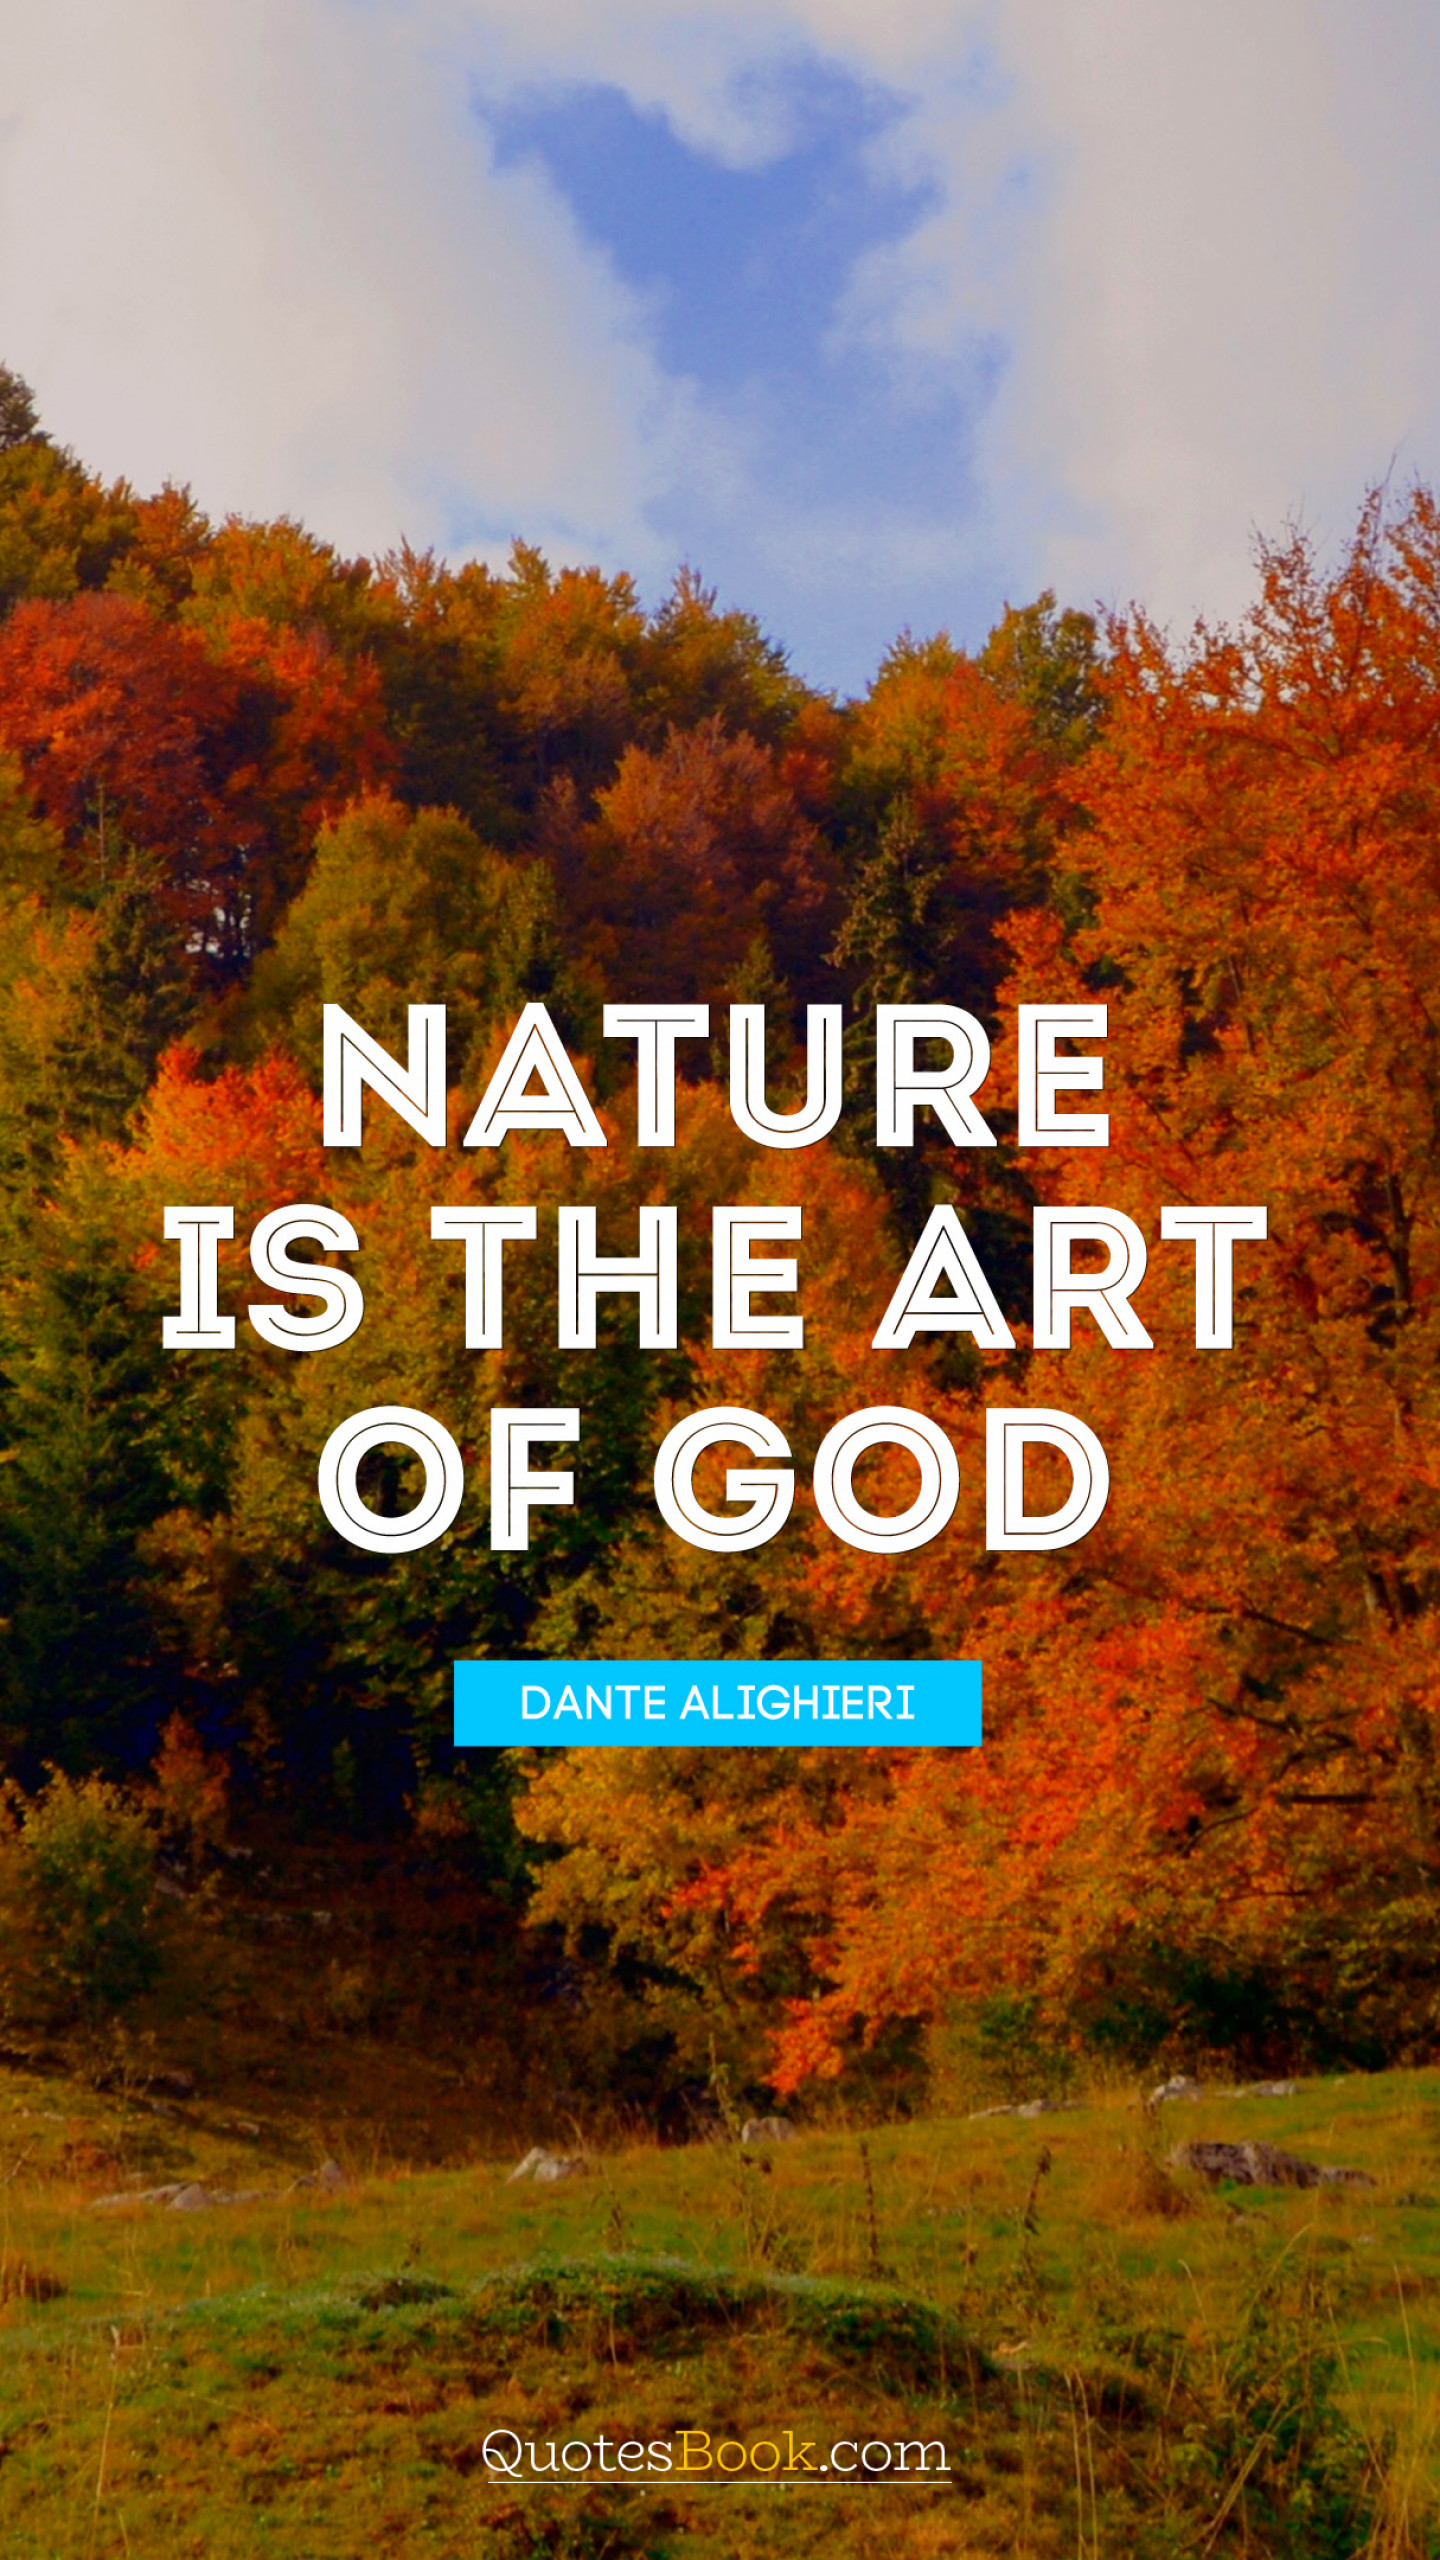 Nature is the art of God. - Quote by Dante Alighieri - QuotesBook